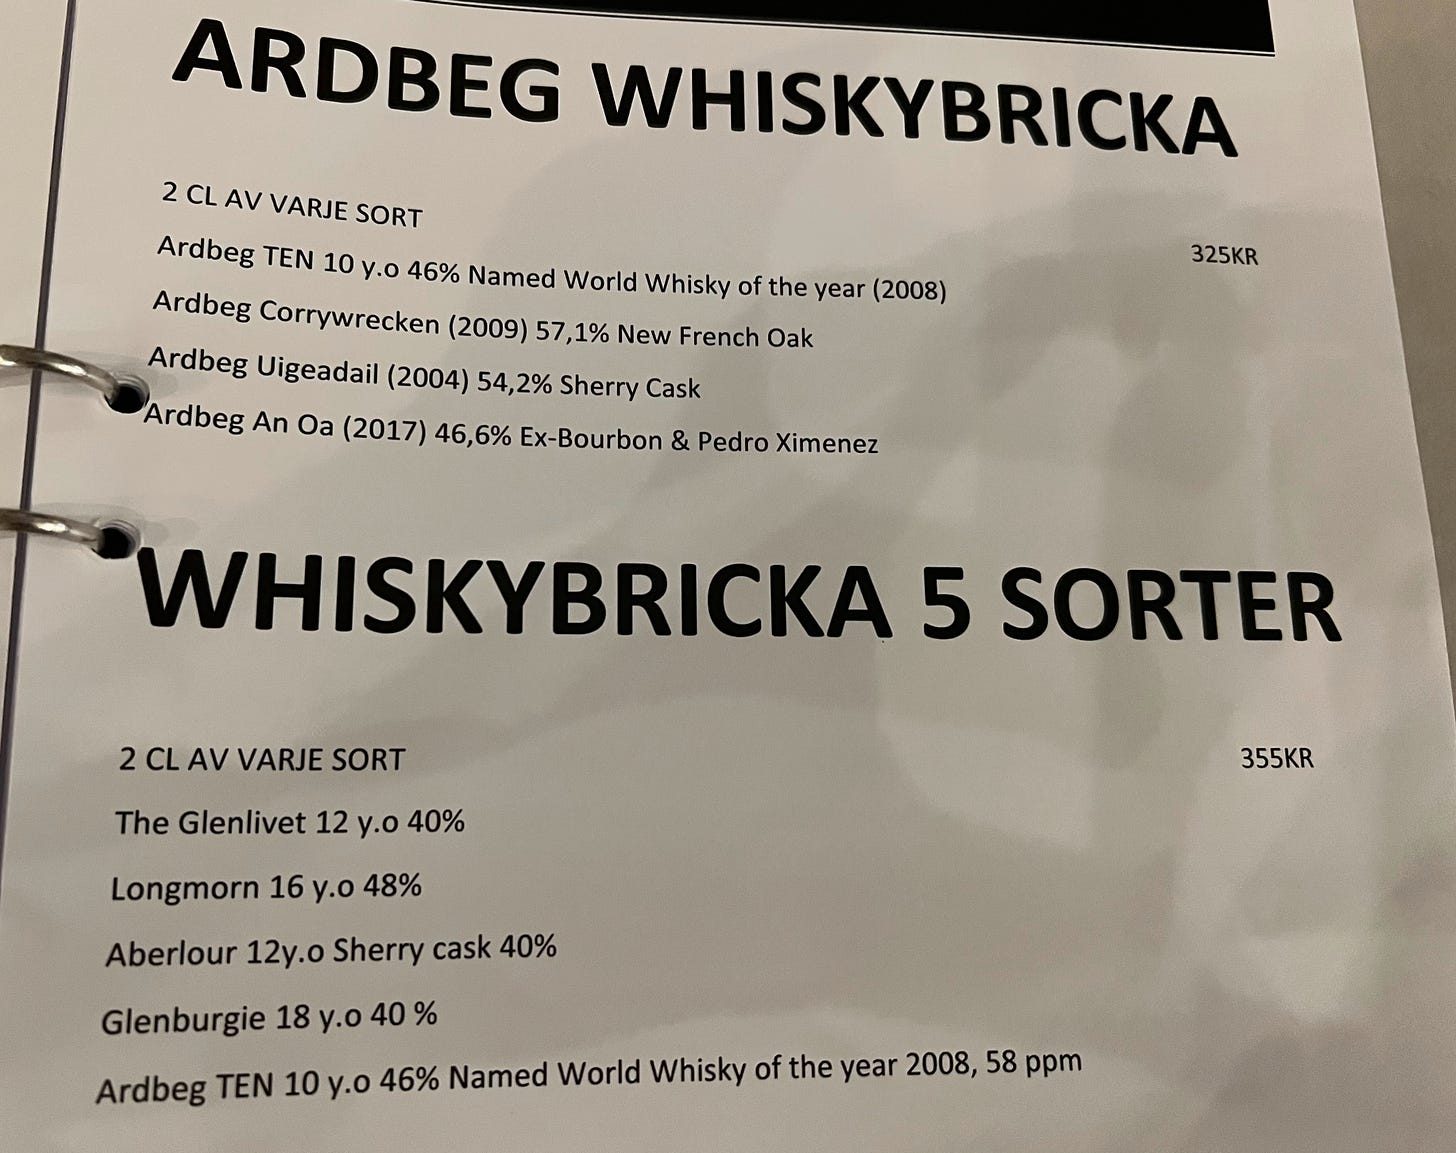 Menu page showing two different whiskybricka